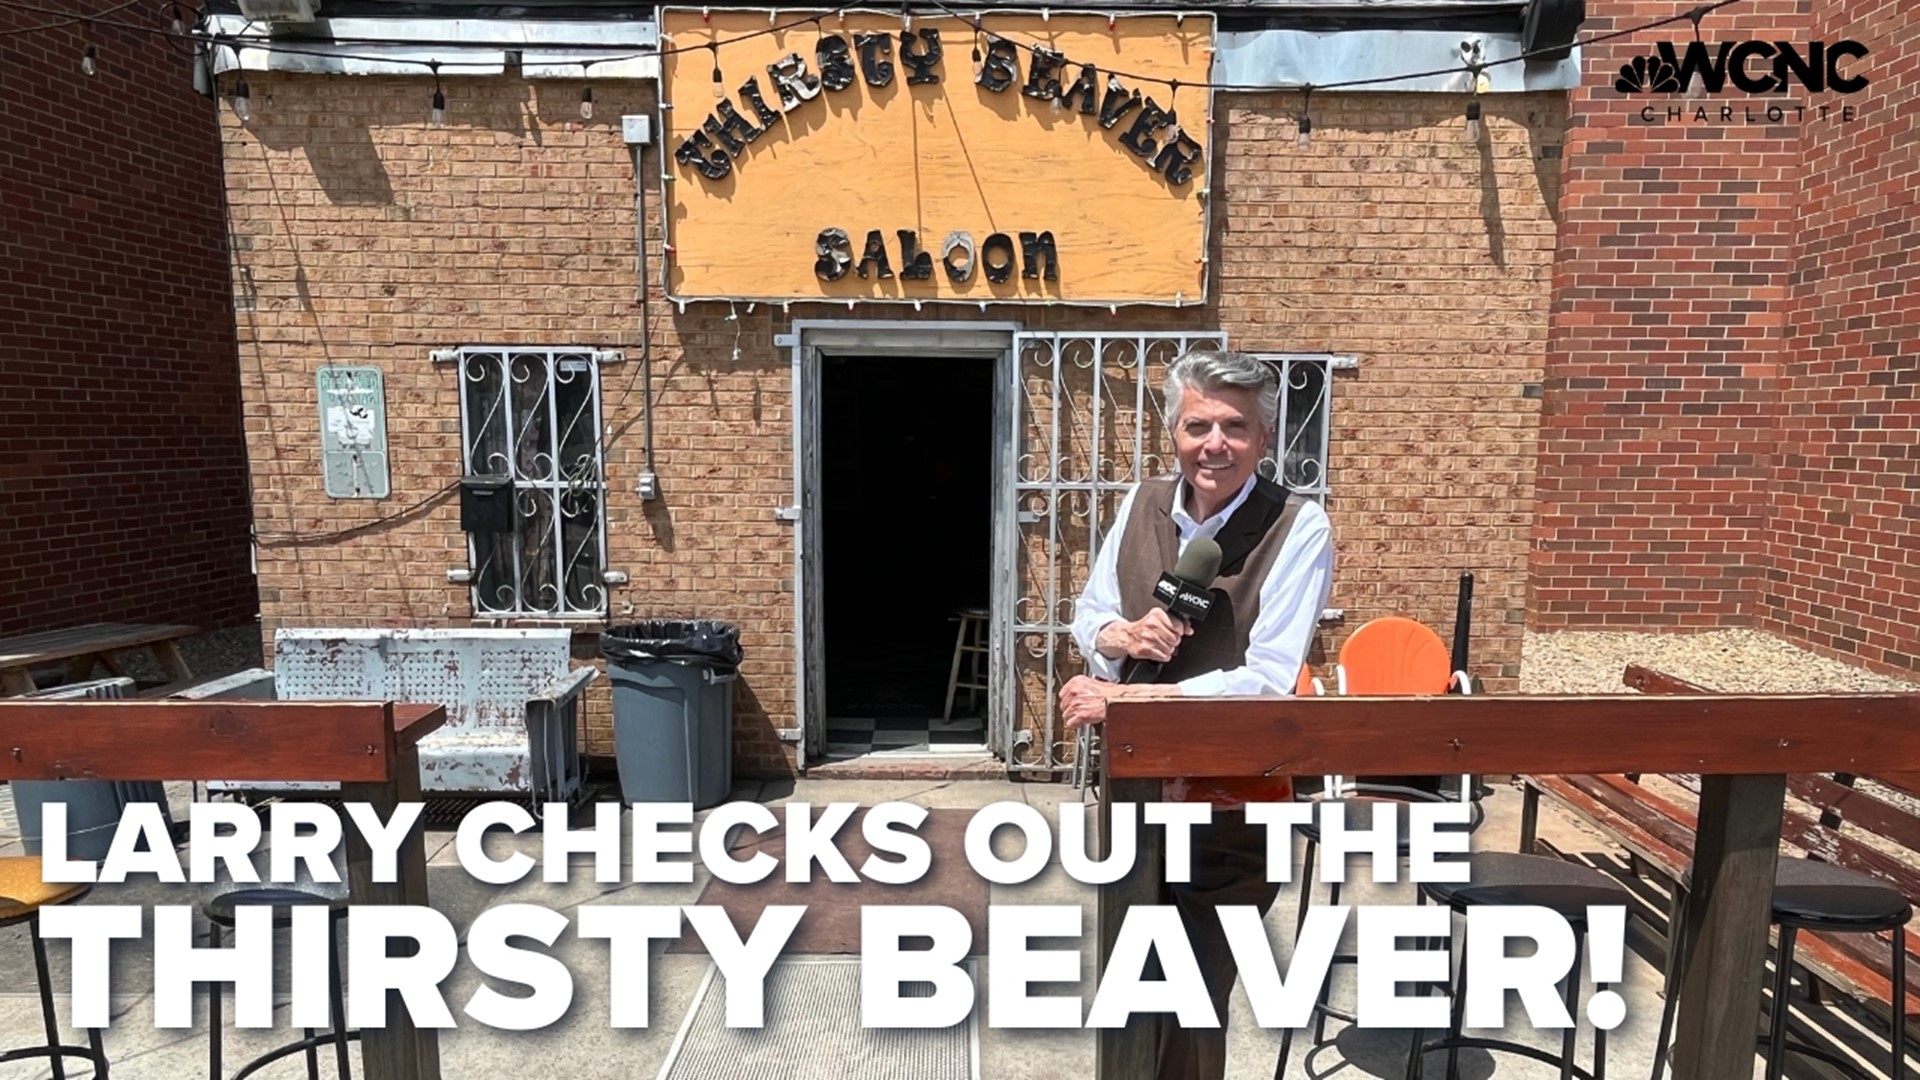 Learn more about this famous dive bar with Larry Sprinkle!